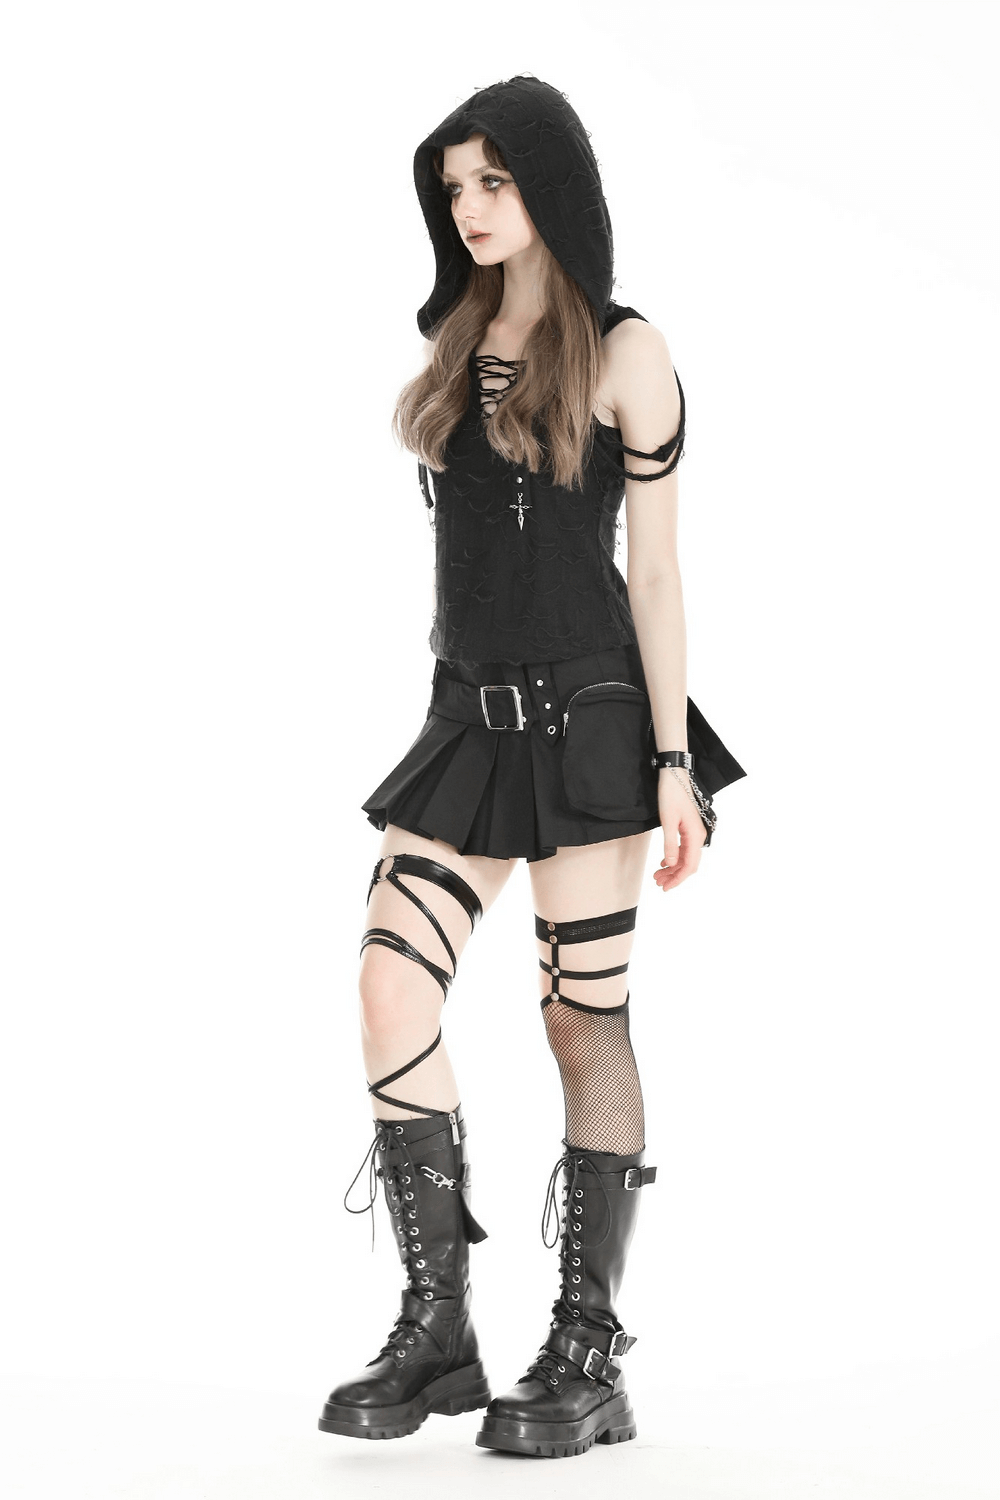 Gothic Hooded Top with Cutouts and Lace-Up Front